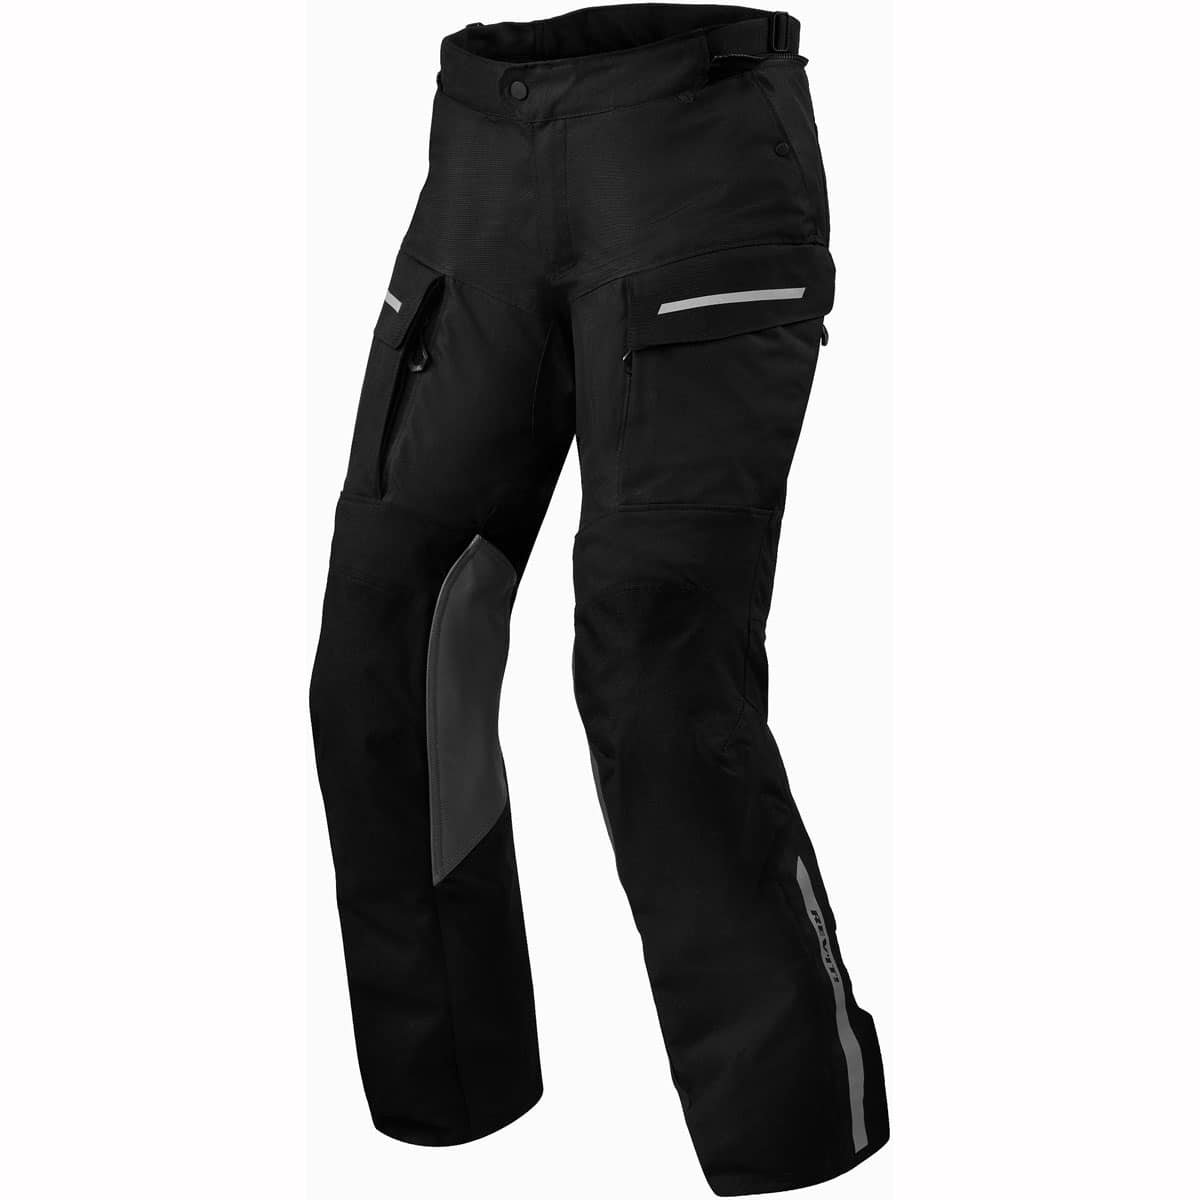 Revit Offtrack 2 H2O Trousers: 3-layer AA-rated waterproof motorcycle touring trousers